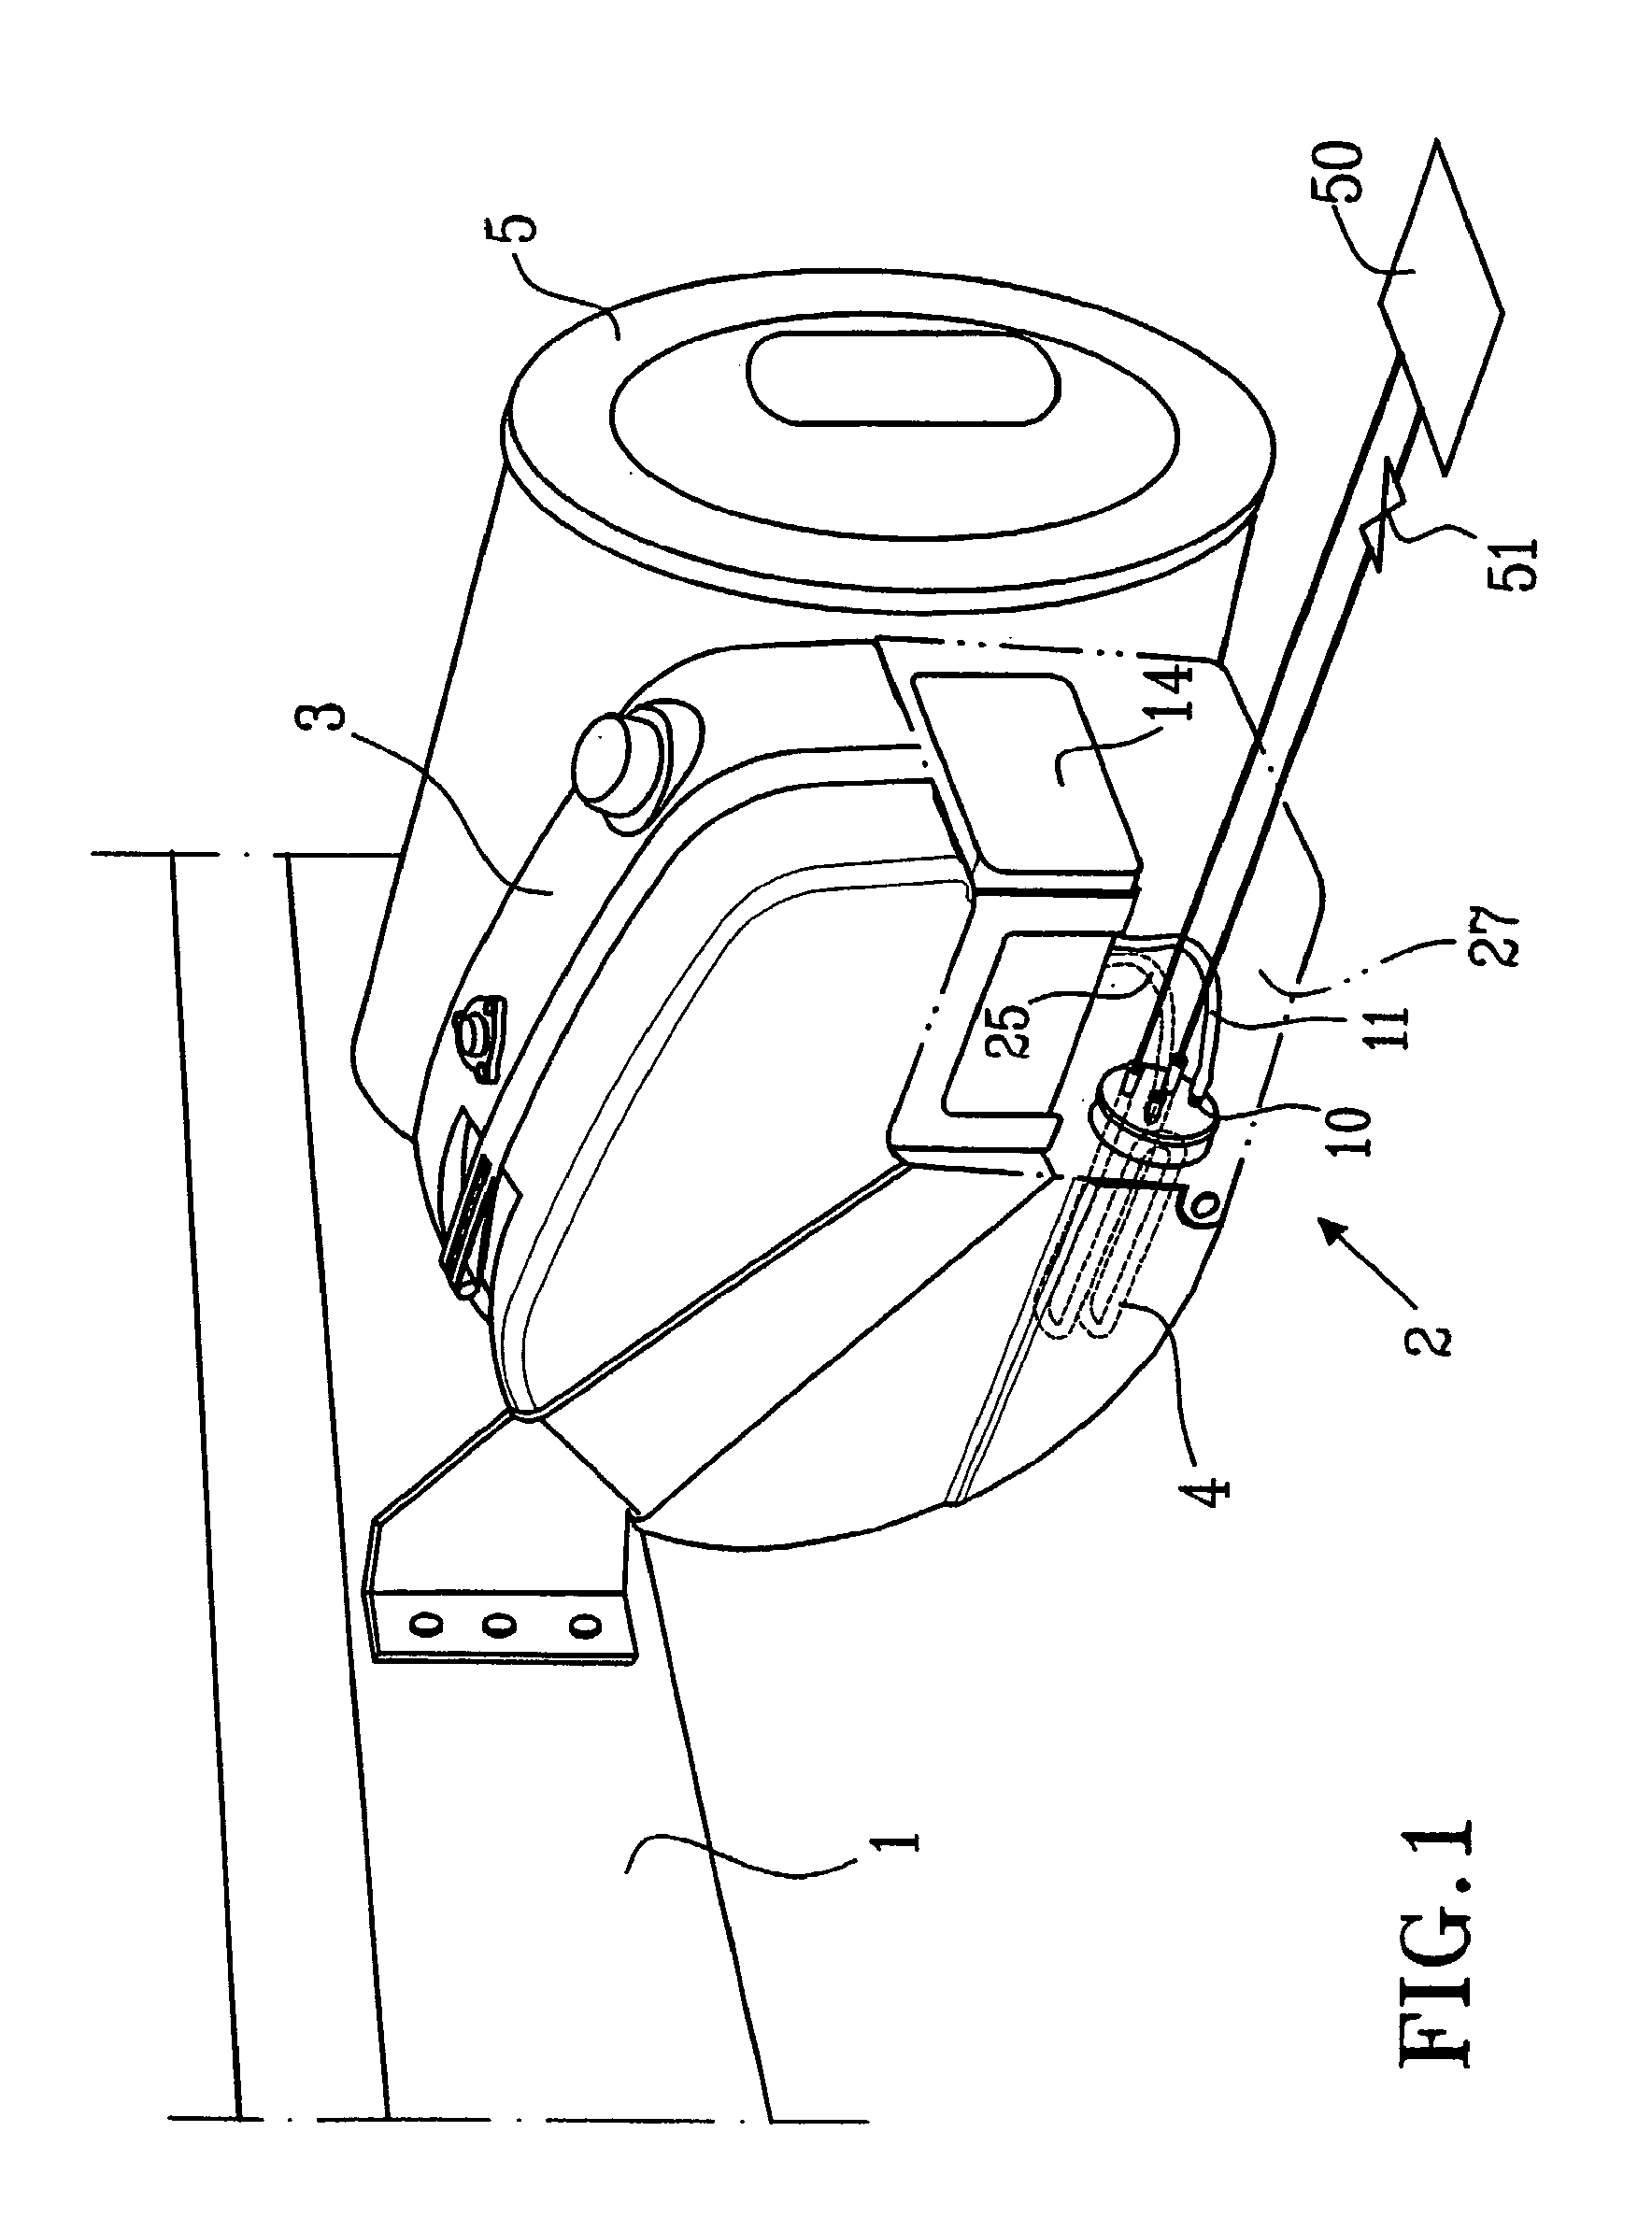 Device for heating